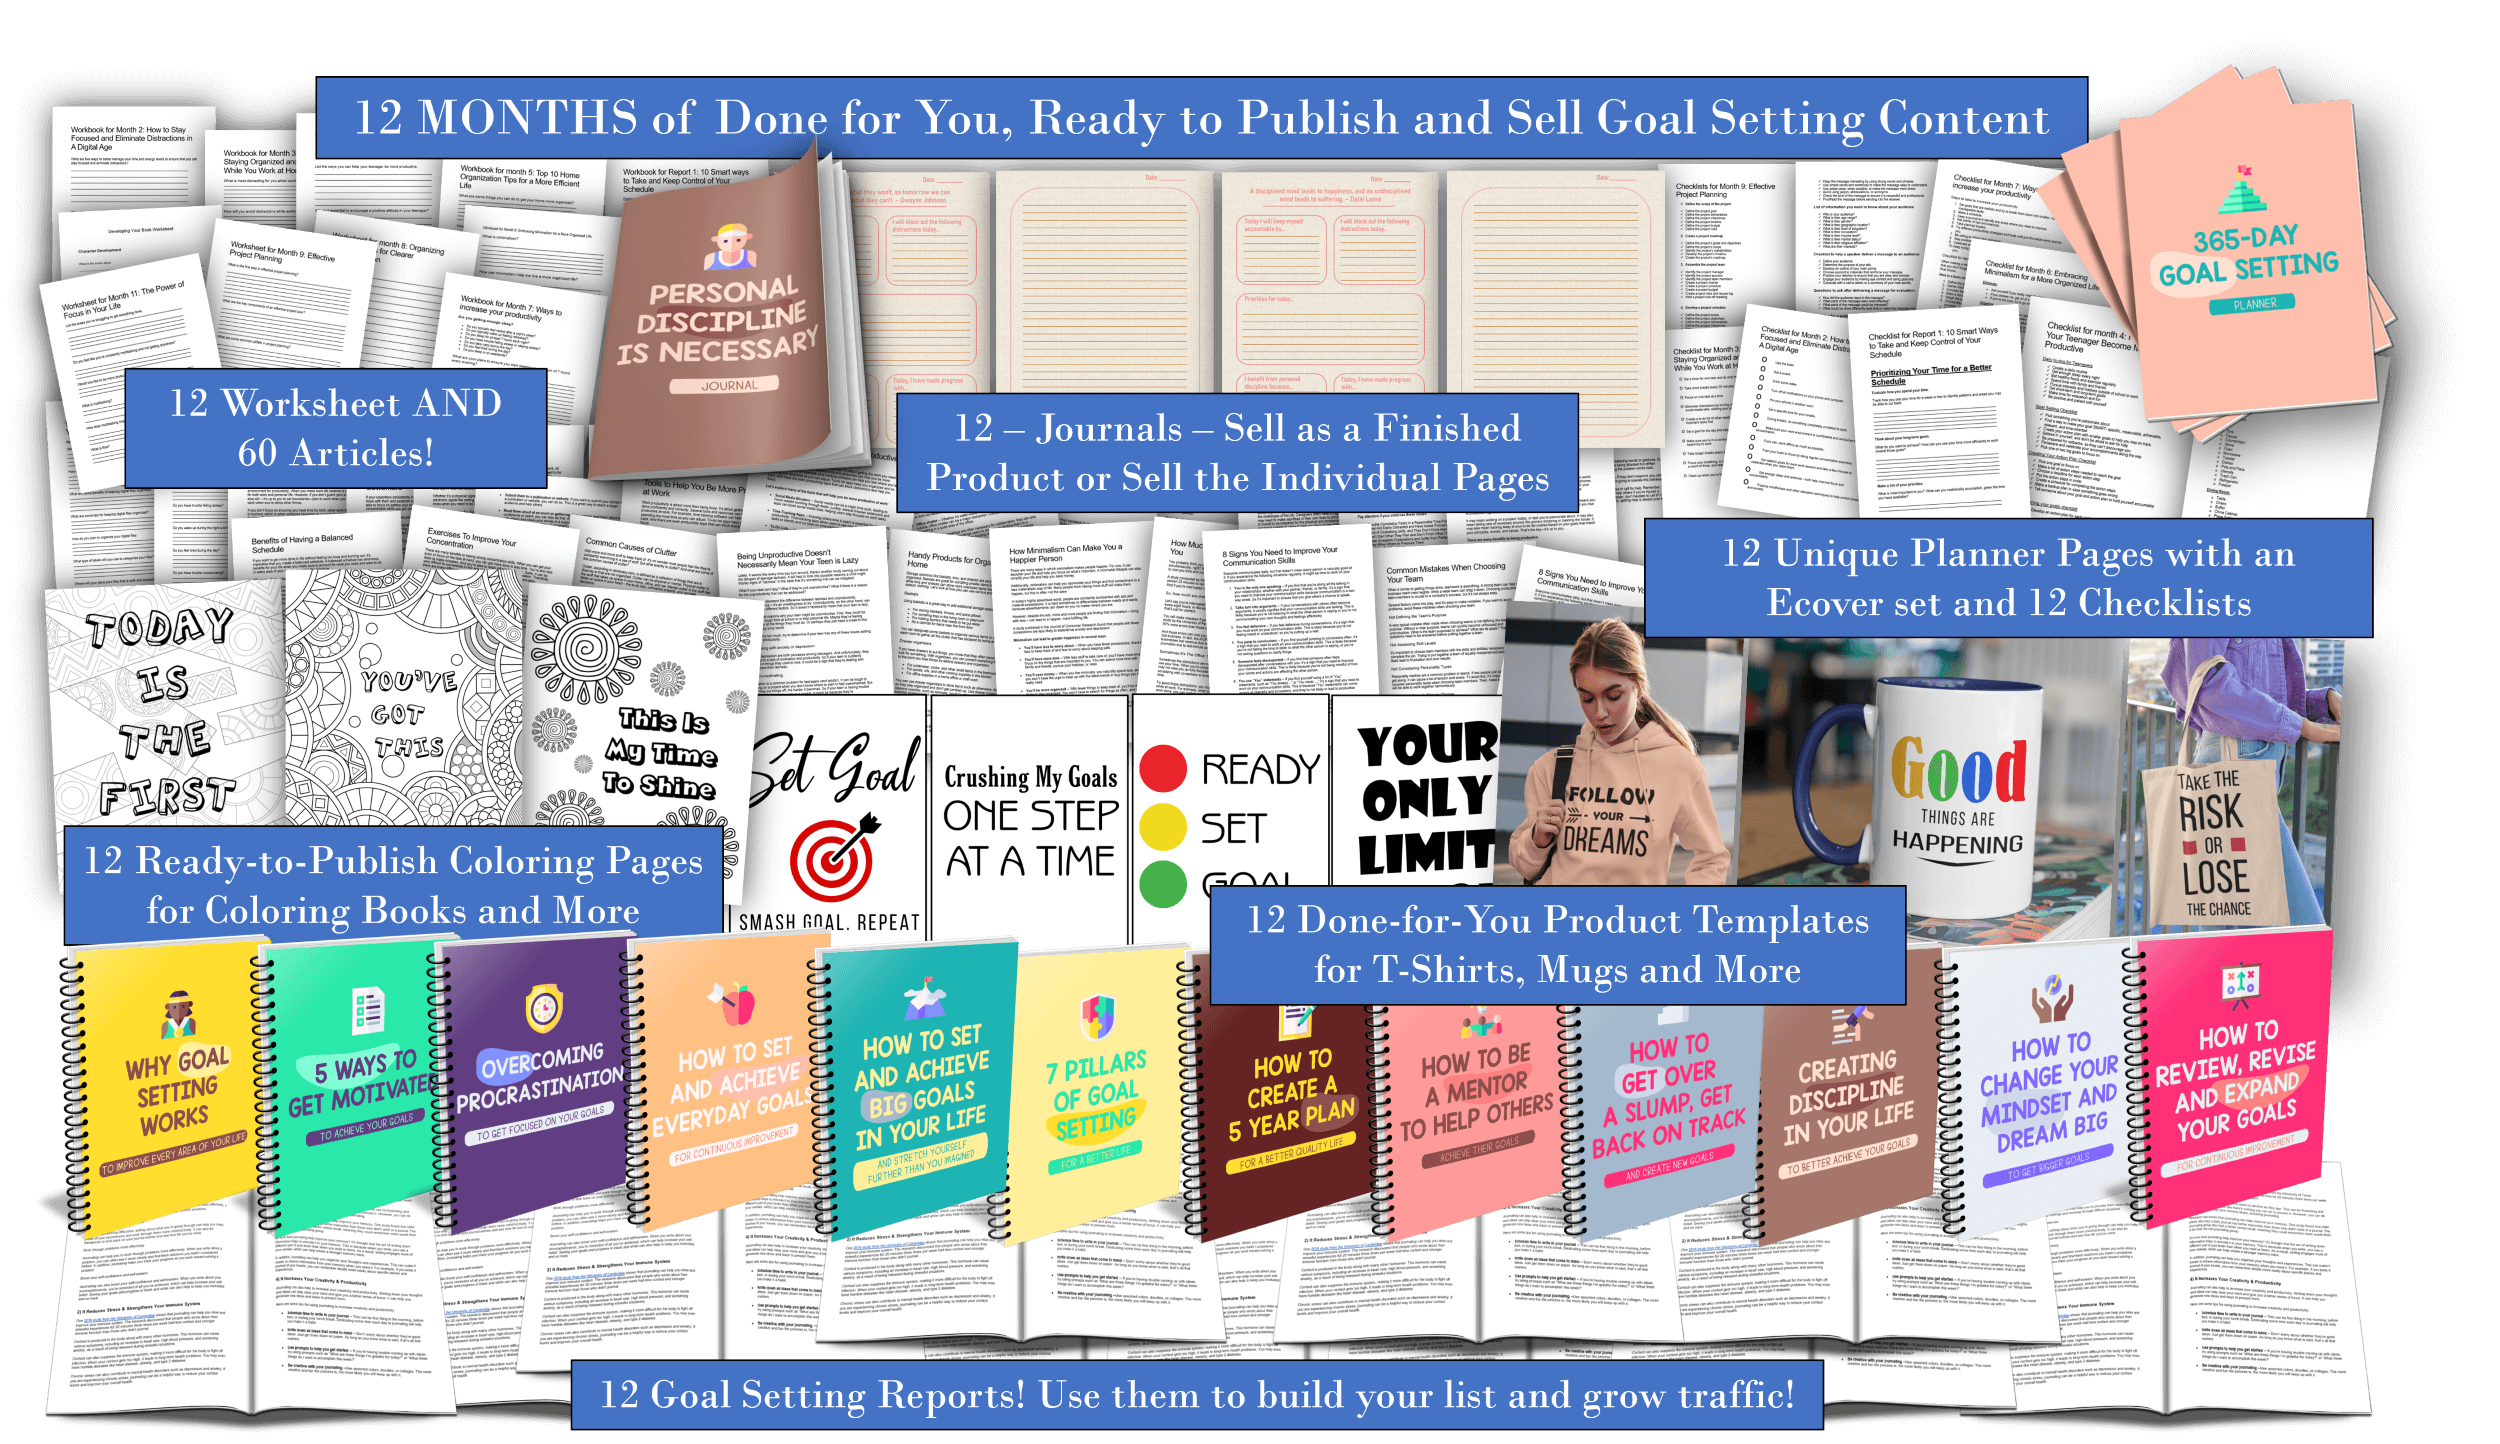 Year's Worth of Goal Setting PLR Content